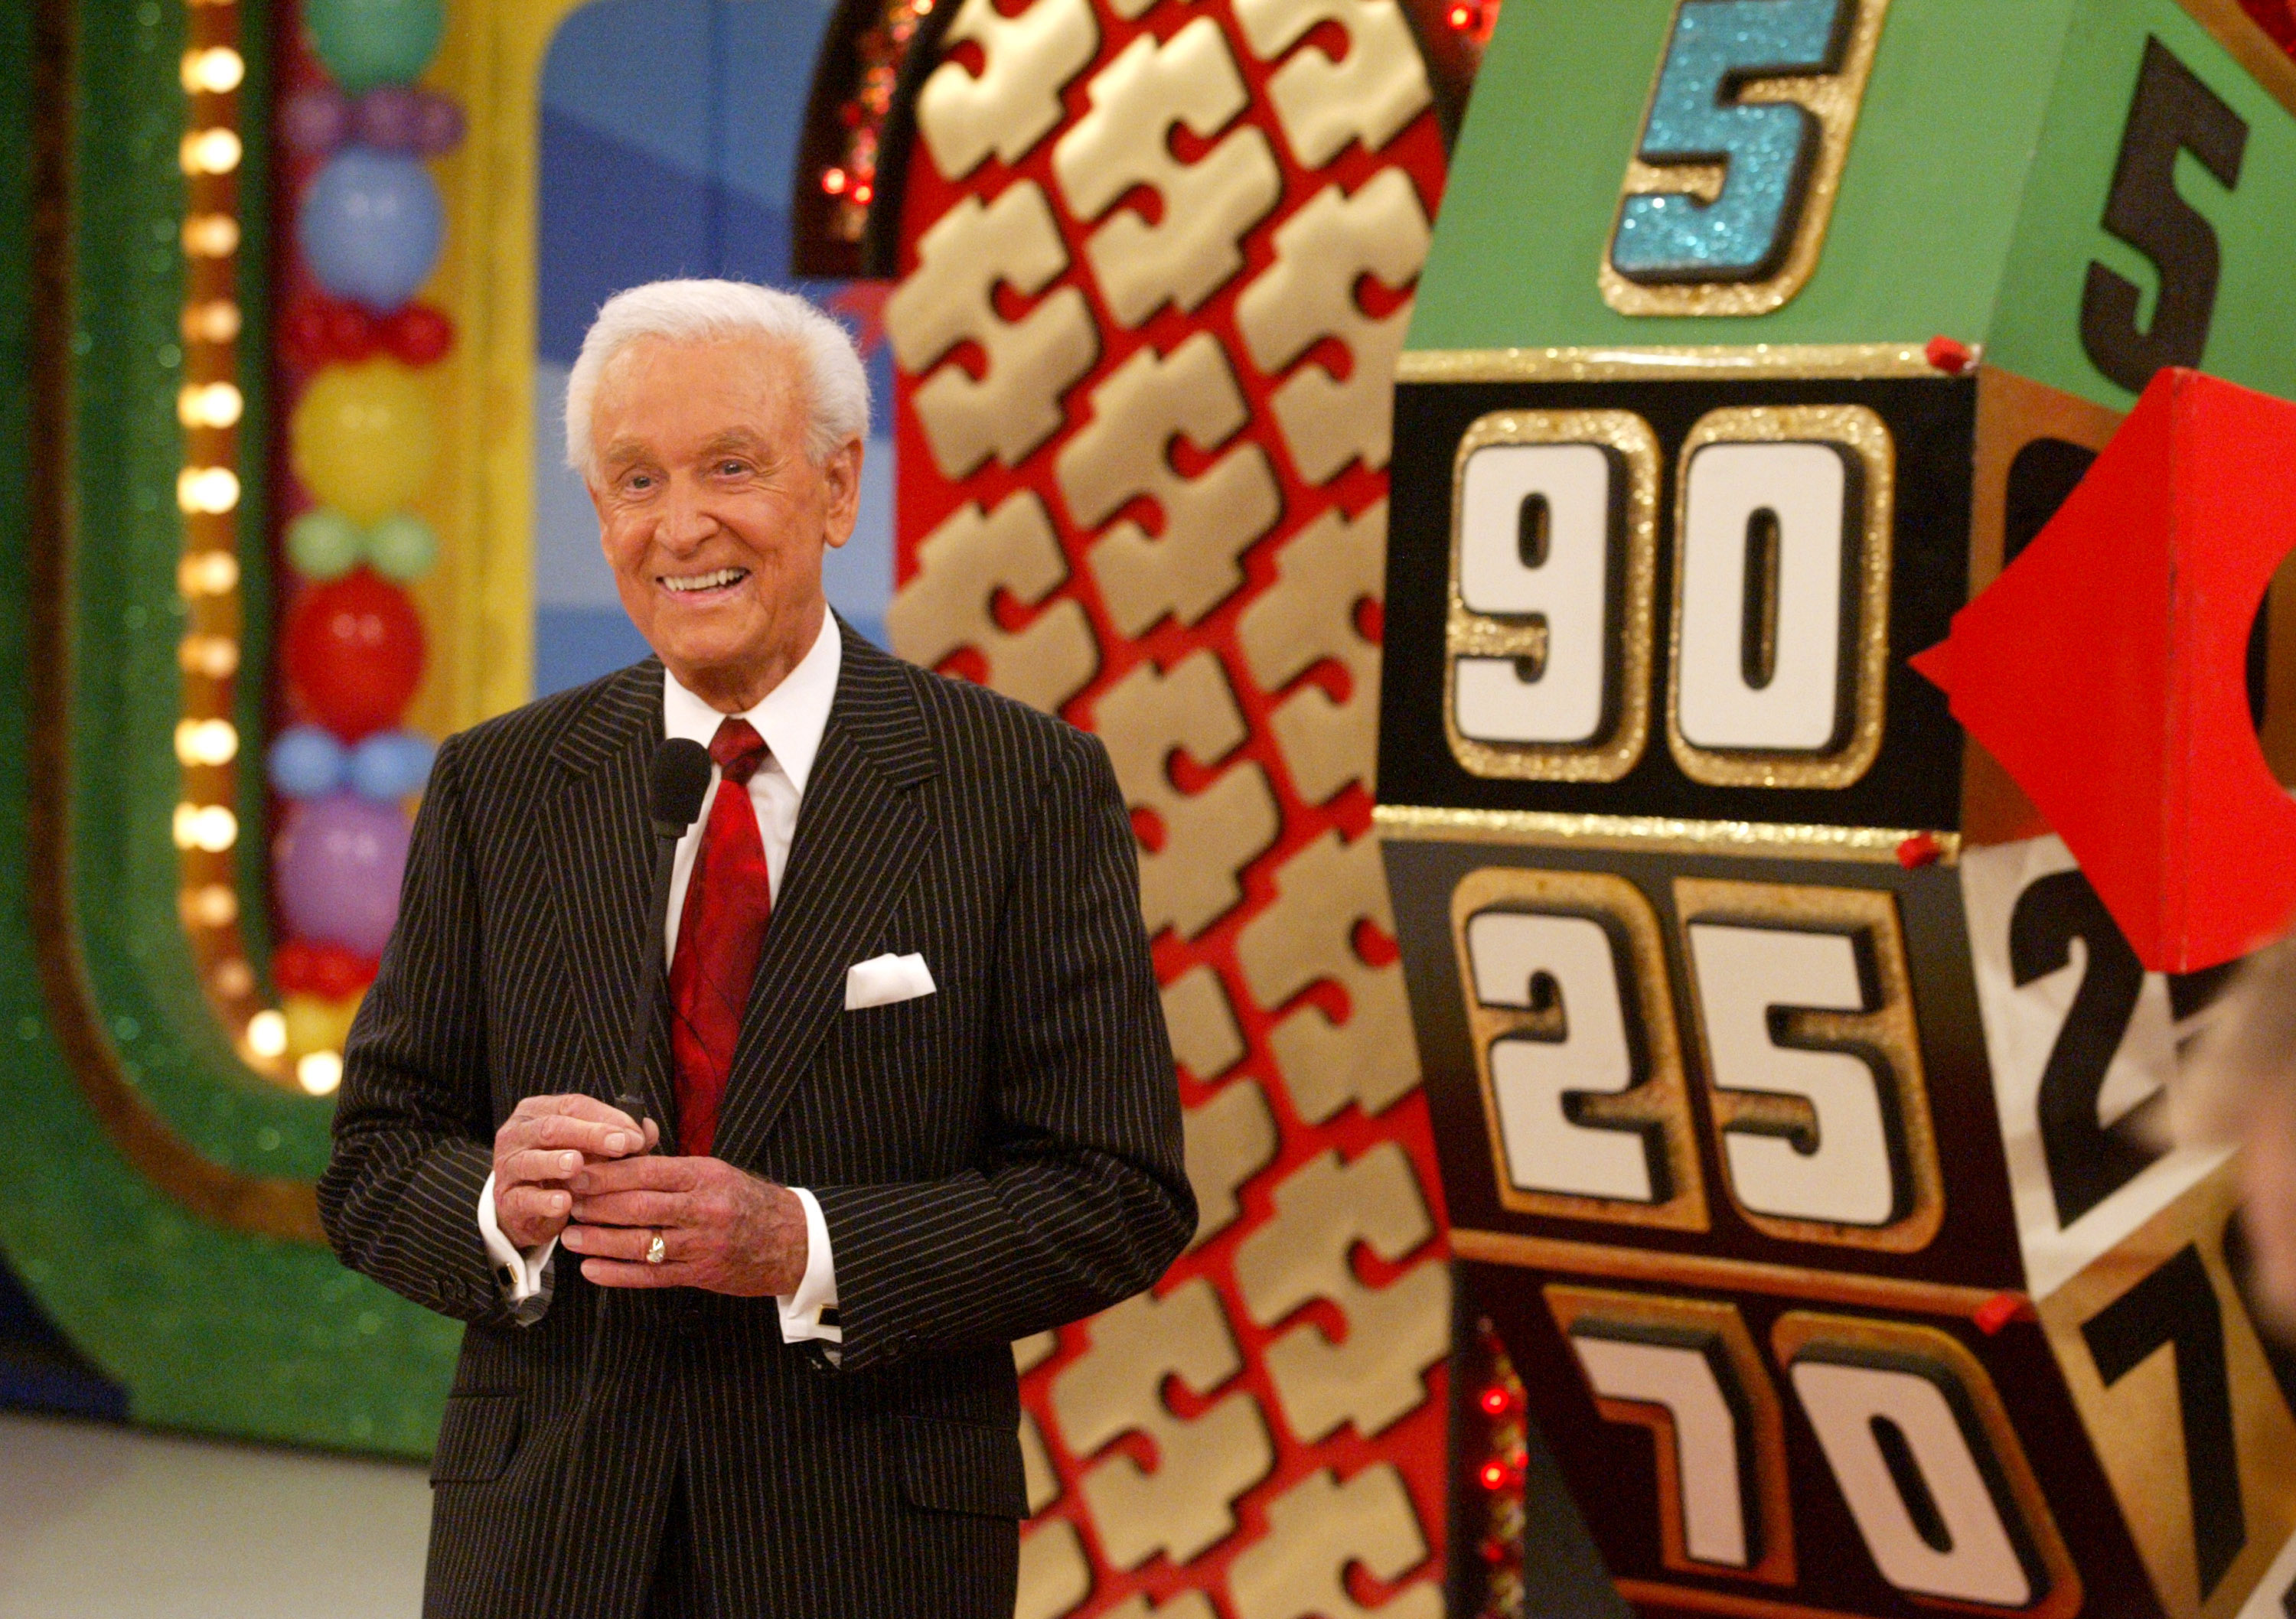 Bob Barker during "The Price is Right" 34th Season Premiere - Taping at CBS Television City in Los Angeles, California, circa 2005 | Source: Getty Images